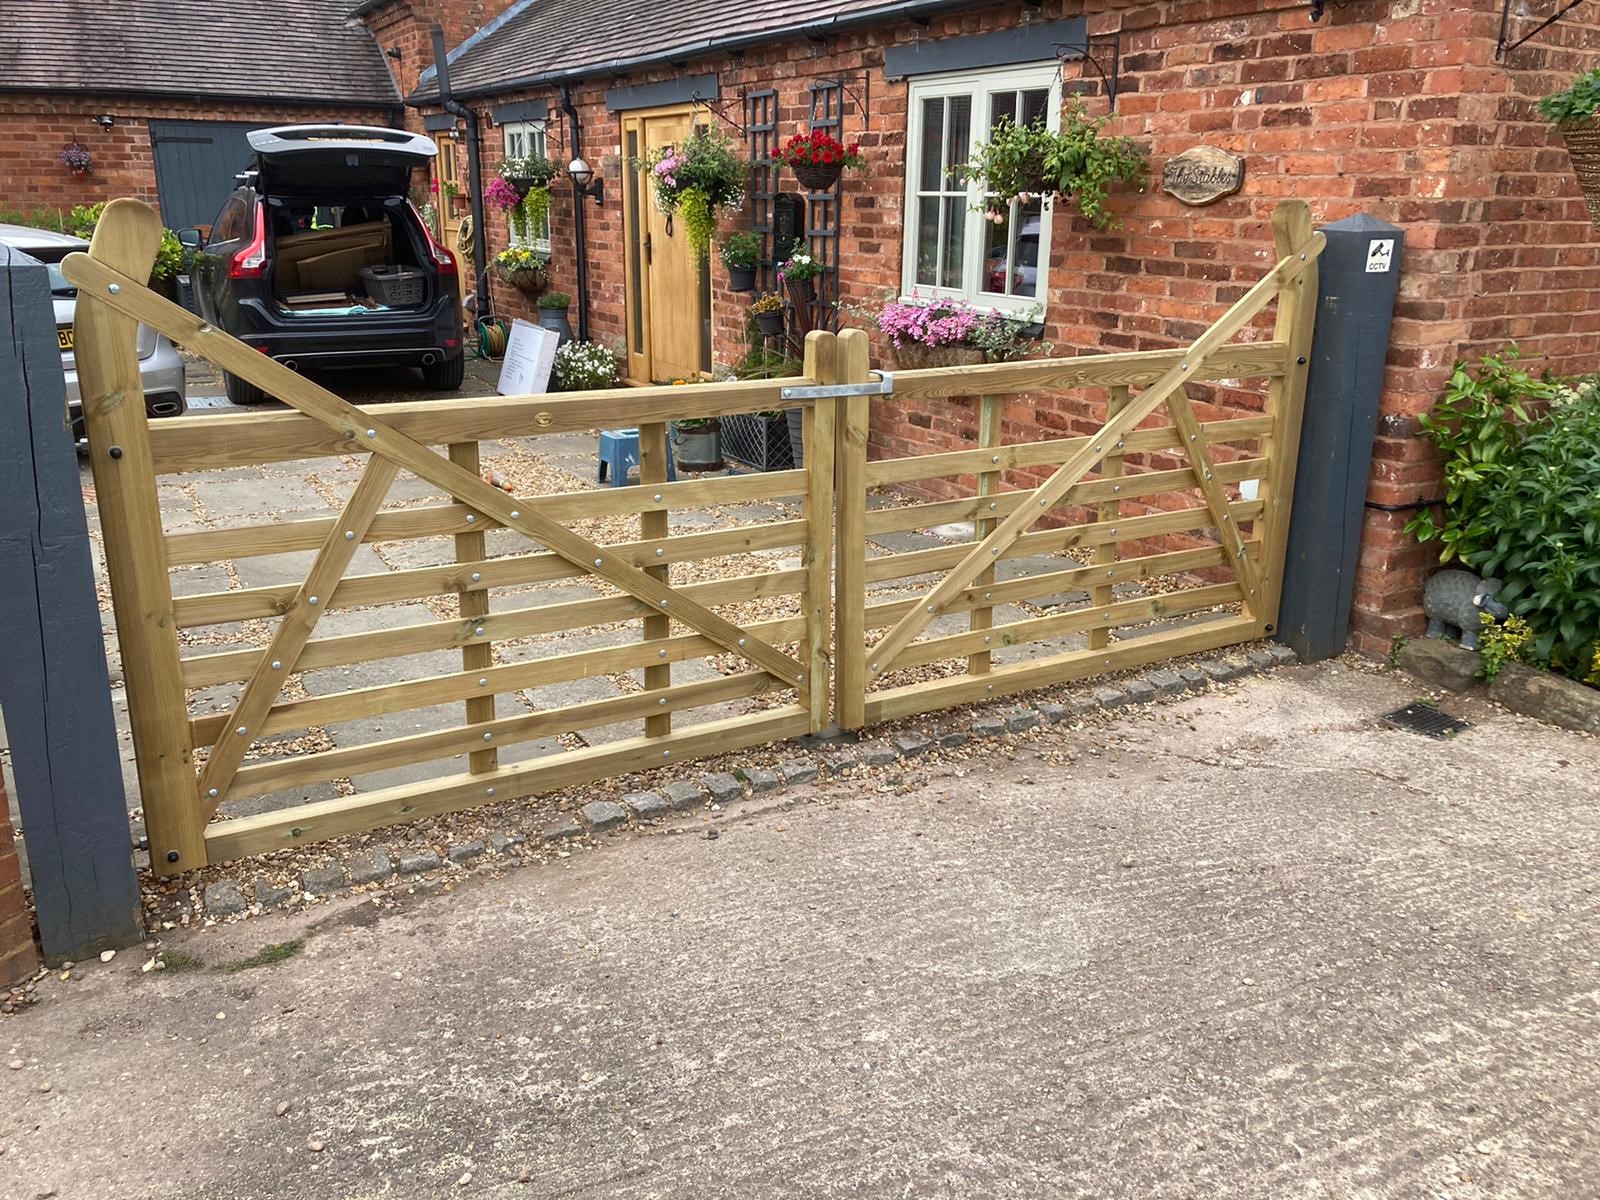 Pressure treated timber field gates securing residential driveway entrance